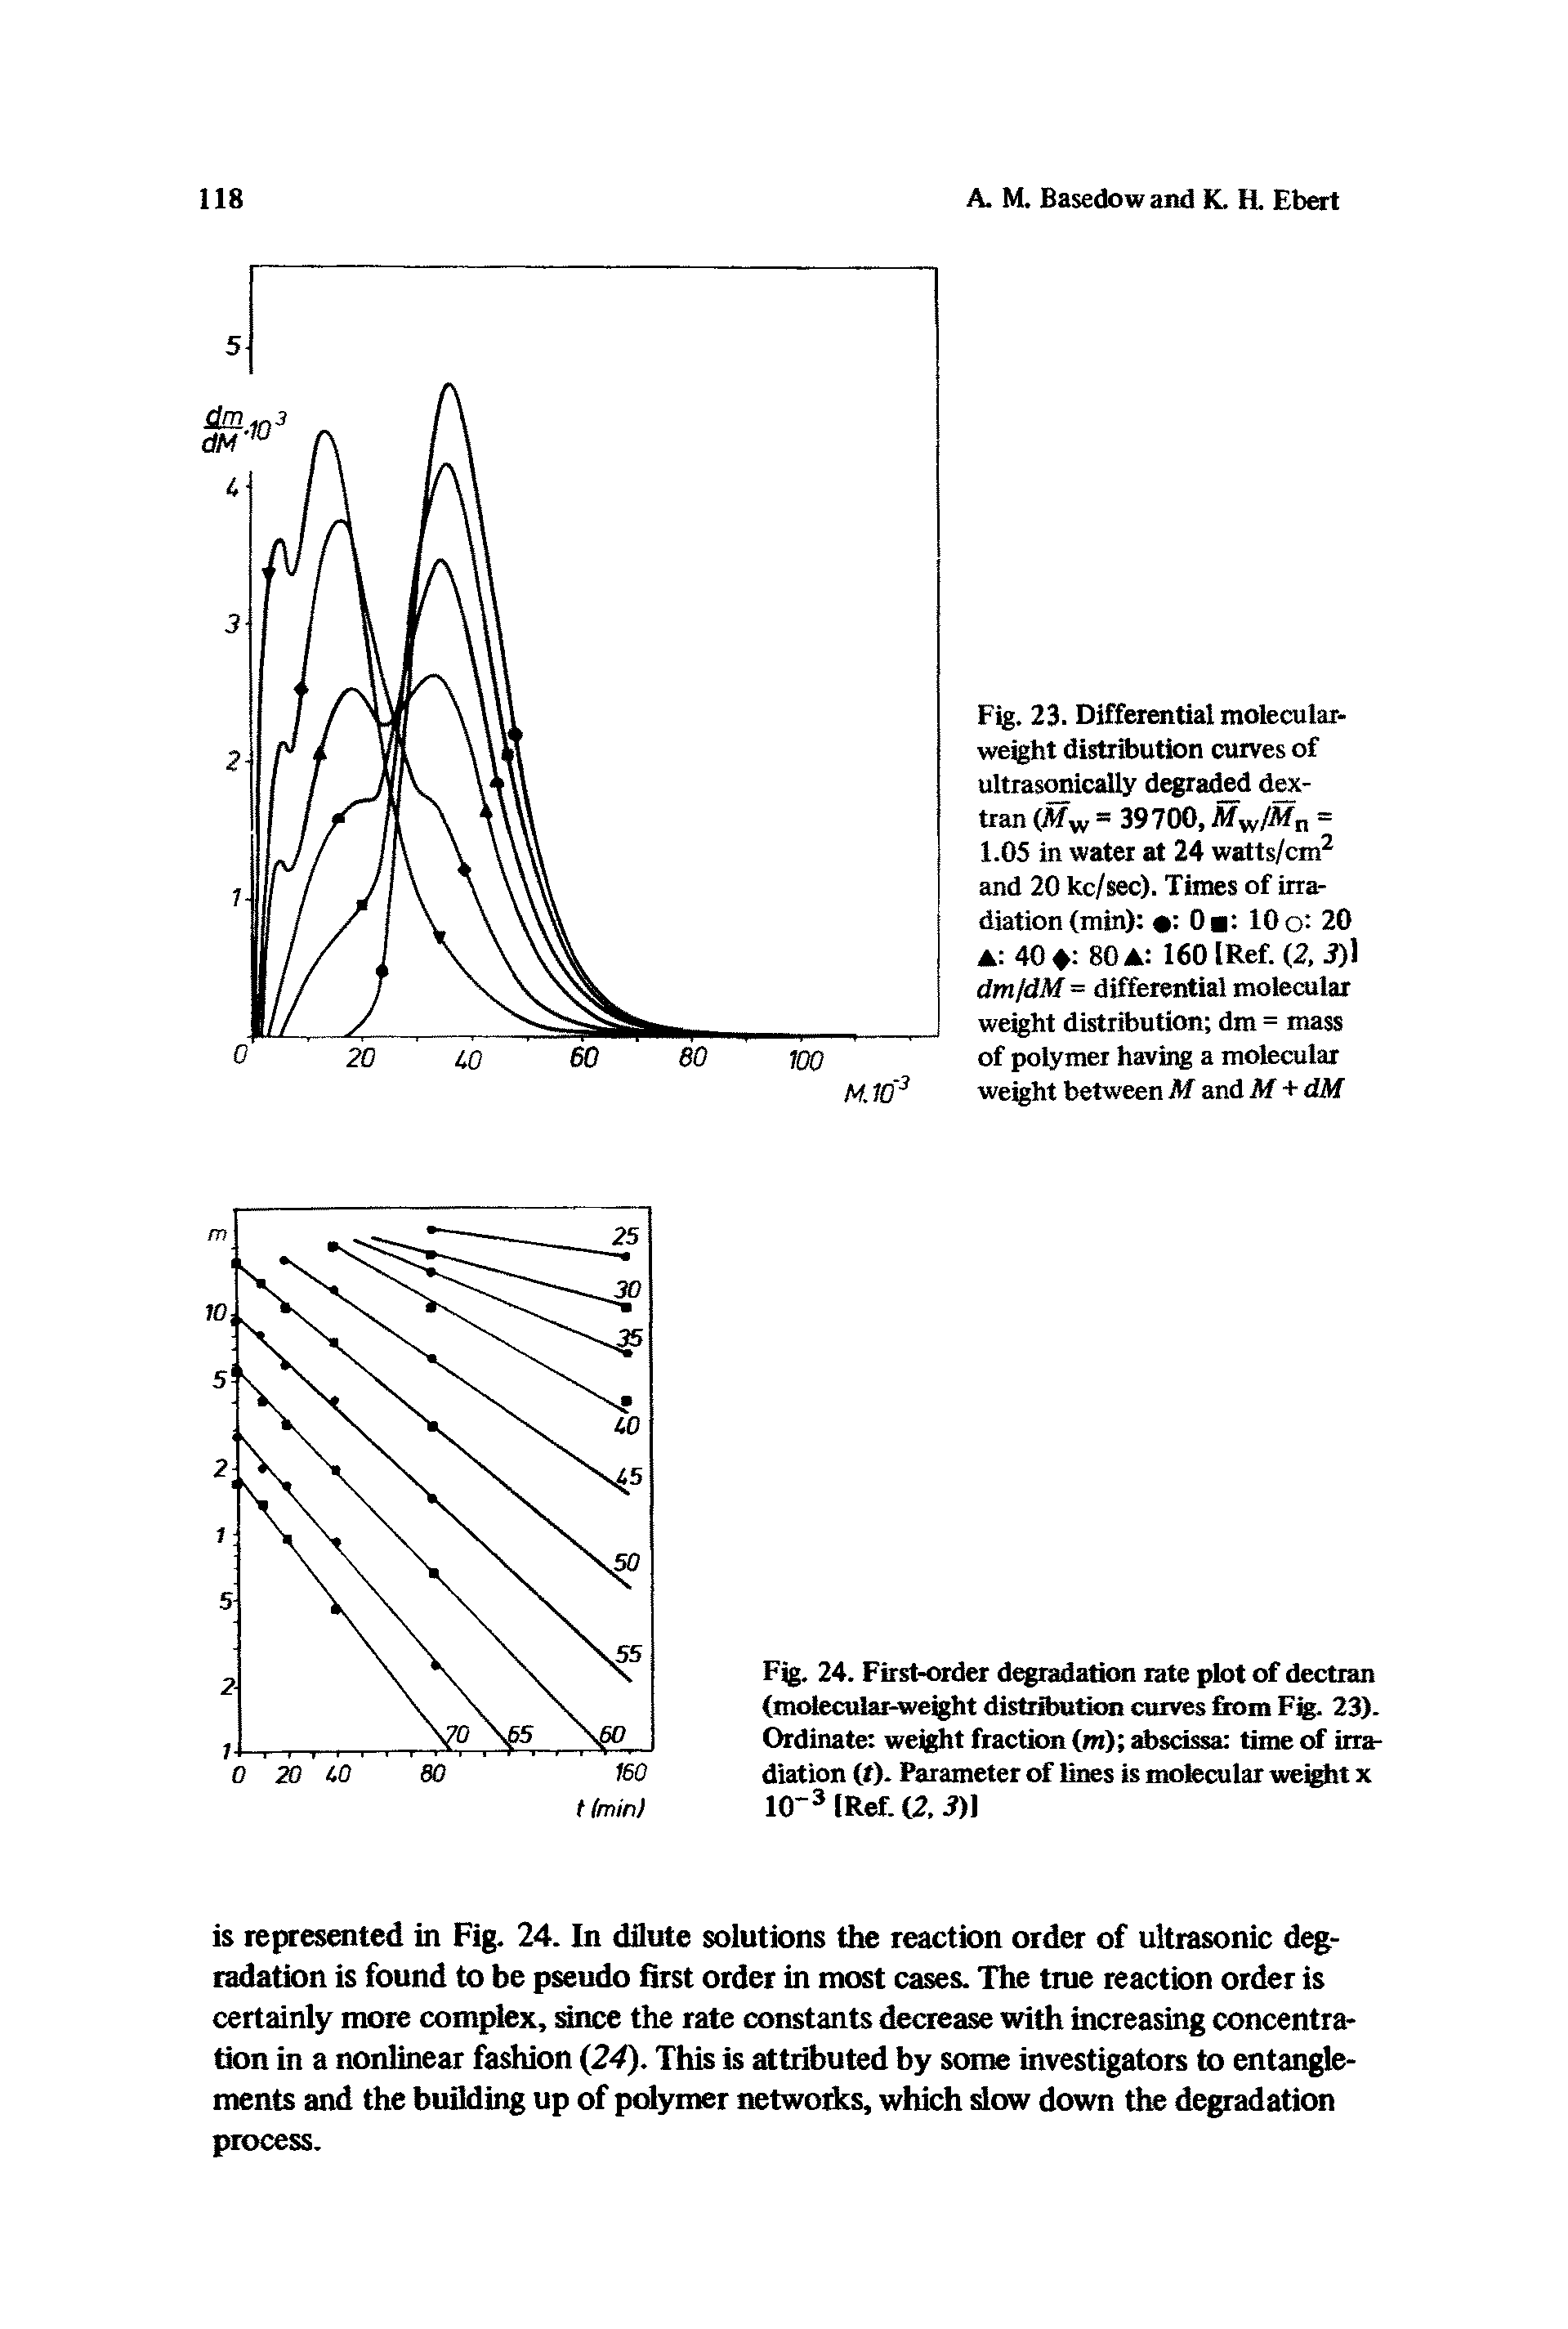 Fig. 23. Differential molecular-weight distribution curves of ultrasOTically degra d dM-tran (My,= 39700, =...